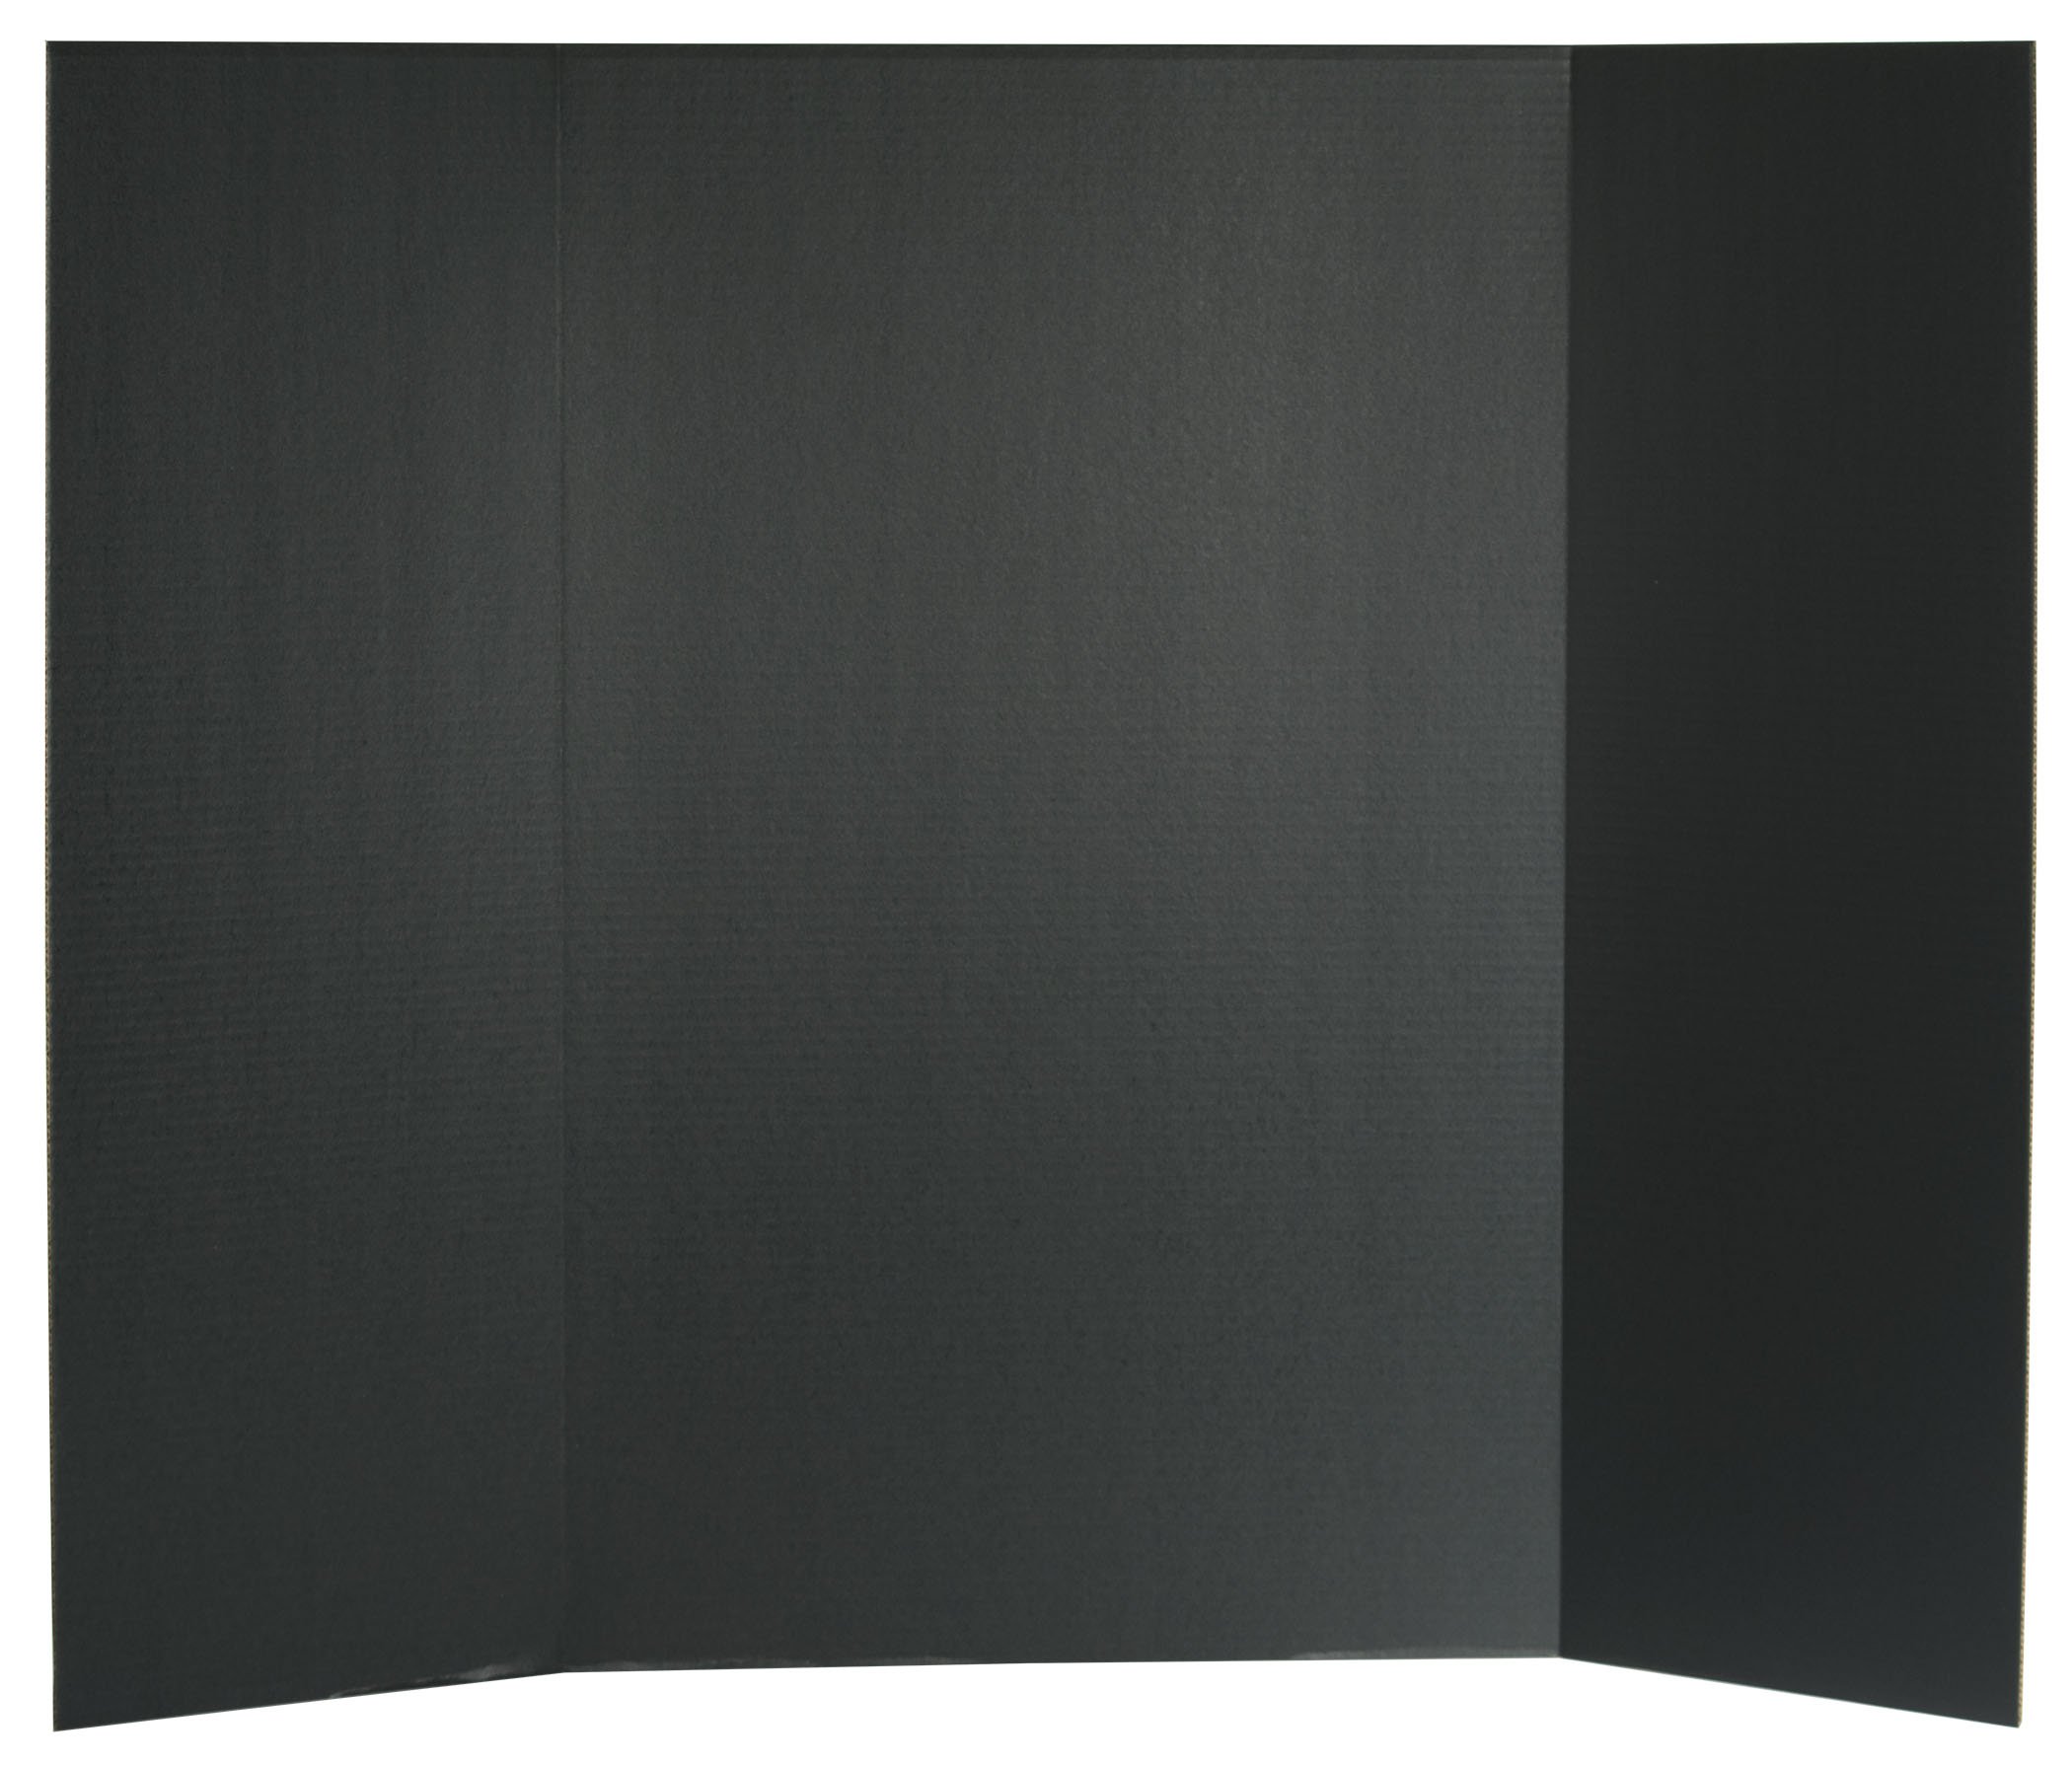 Flipside Products 30067 Project Display Board, Black (Pack of 24)